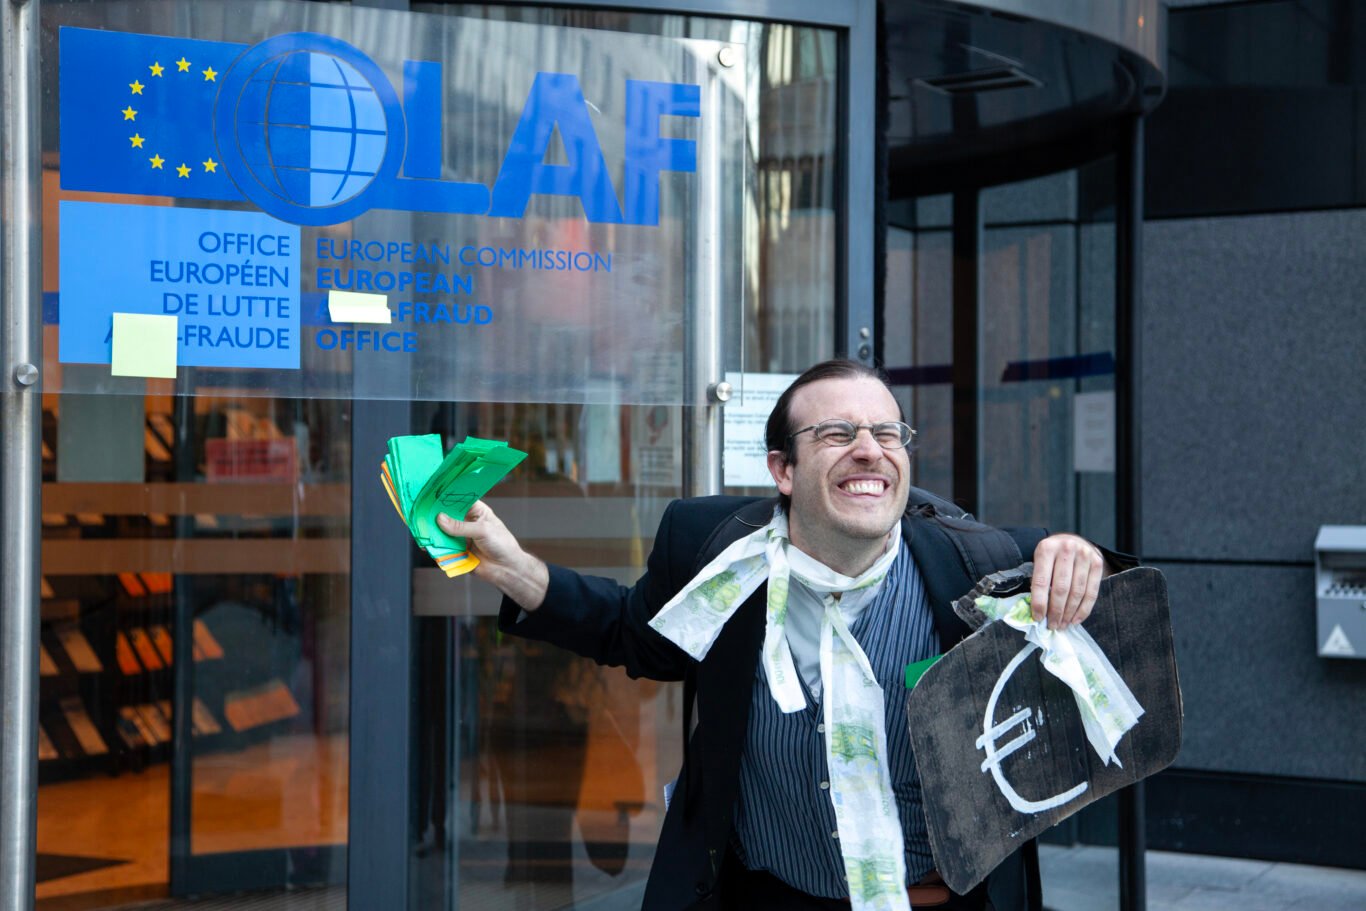 A protester throwing fake money in front of European Anti-Fraud Office whose name is defaced to be Fraud Office.